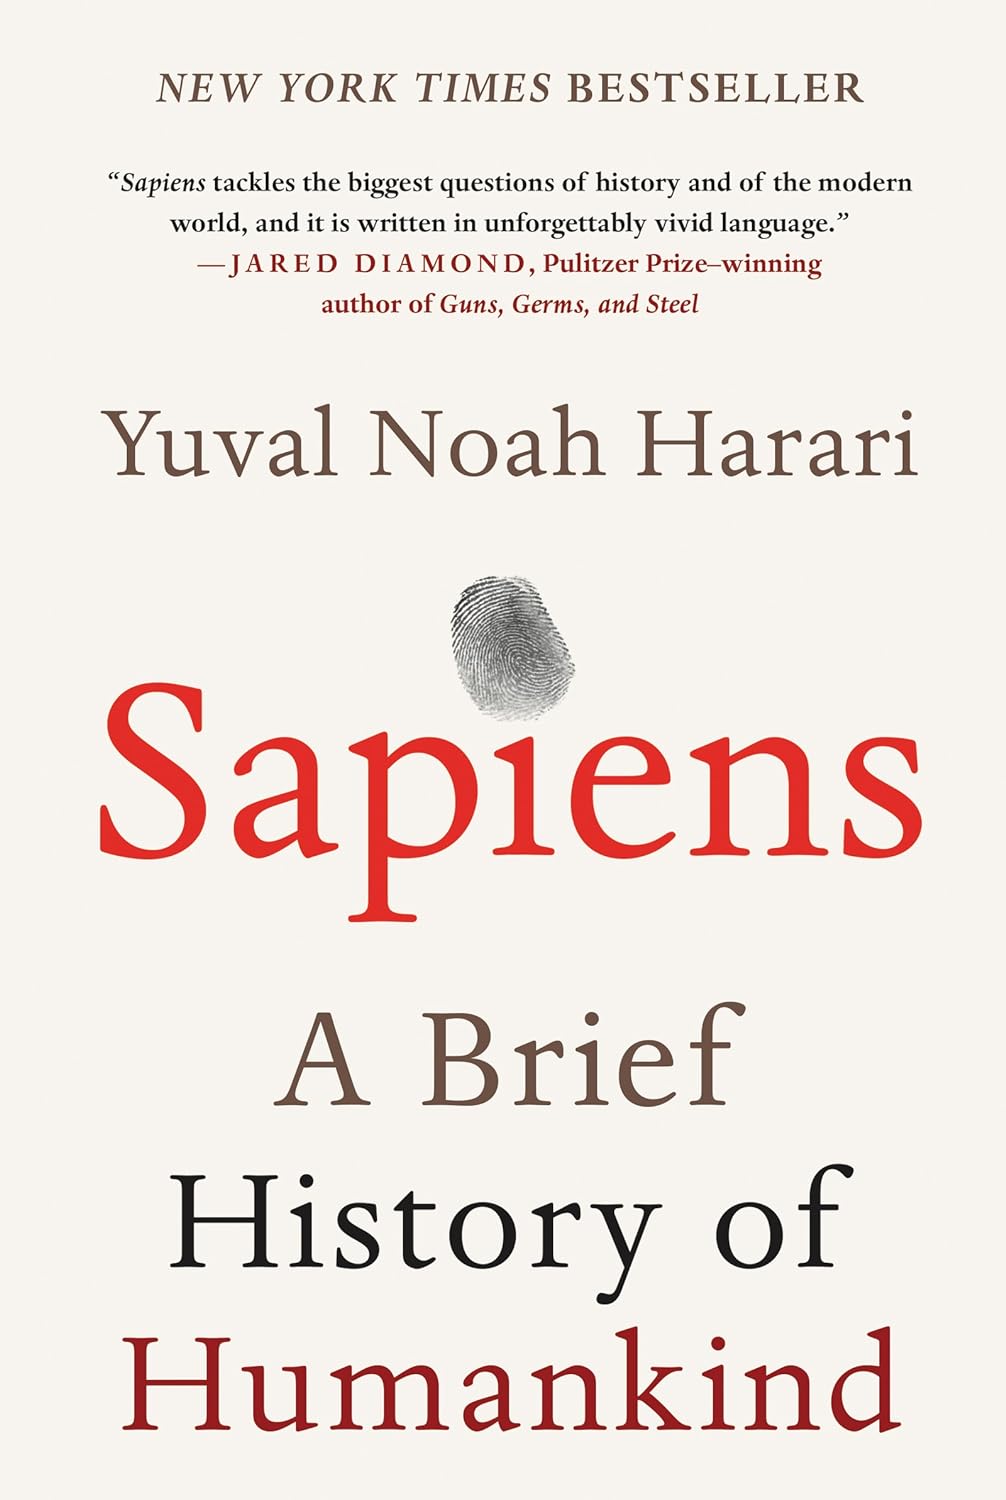 Thnk: Picks - Sapiens: A Brief History of Humankind